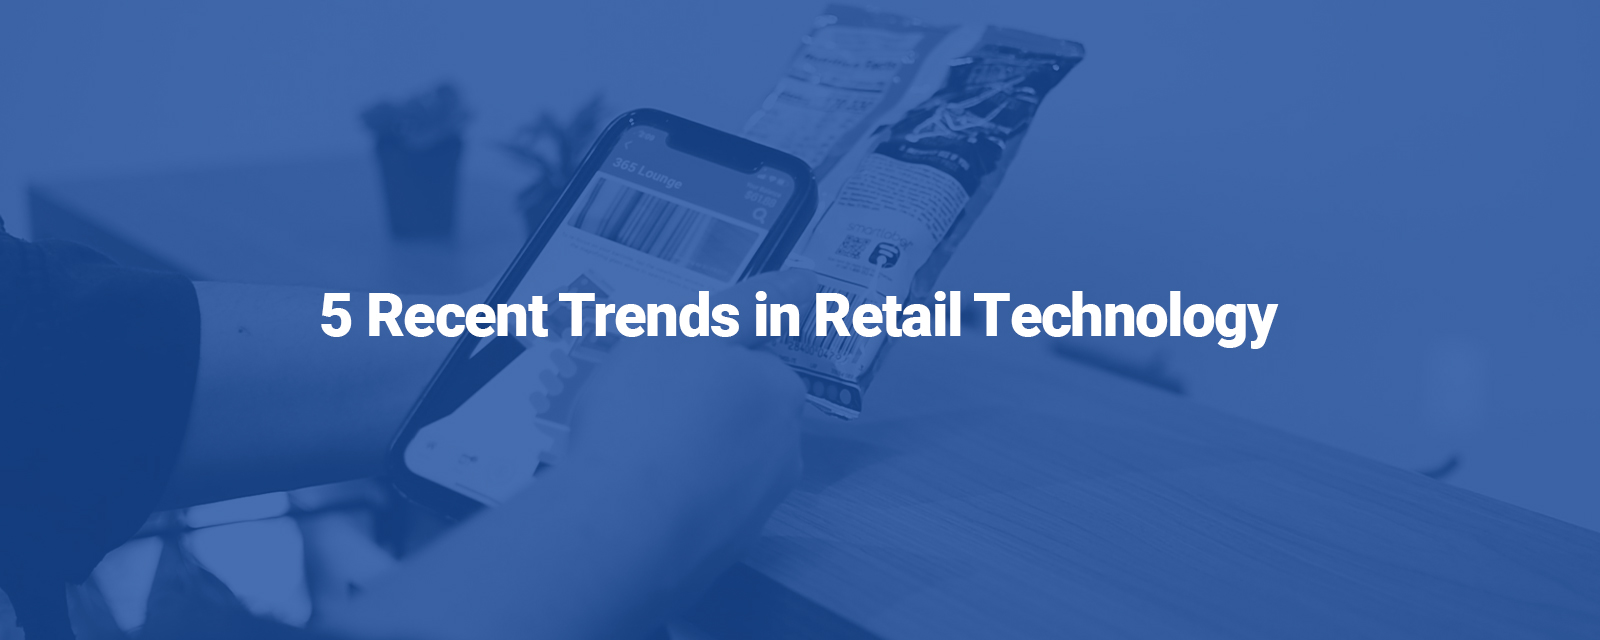 5 Recent Trends in Retail Technology